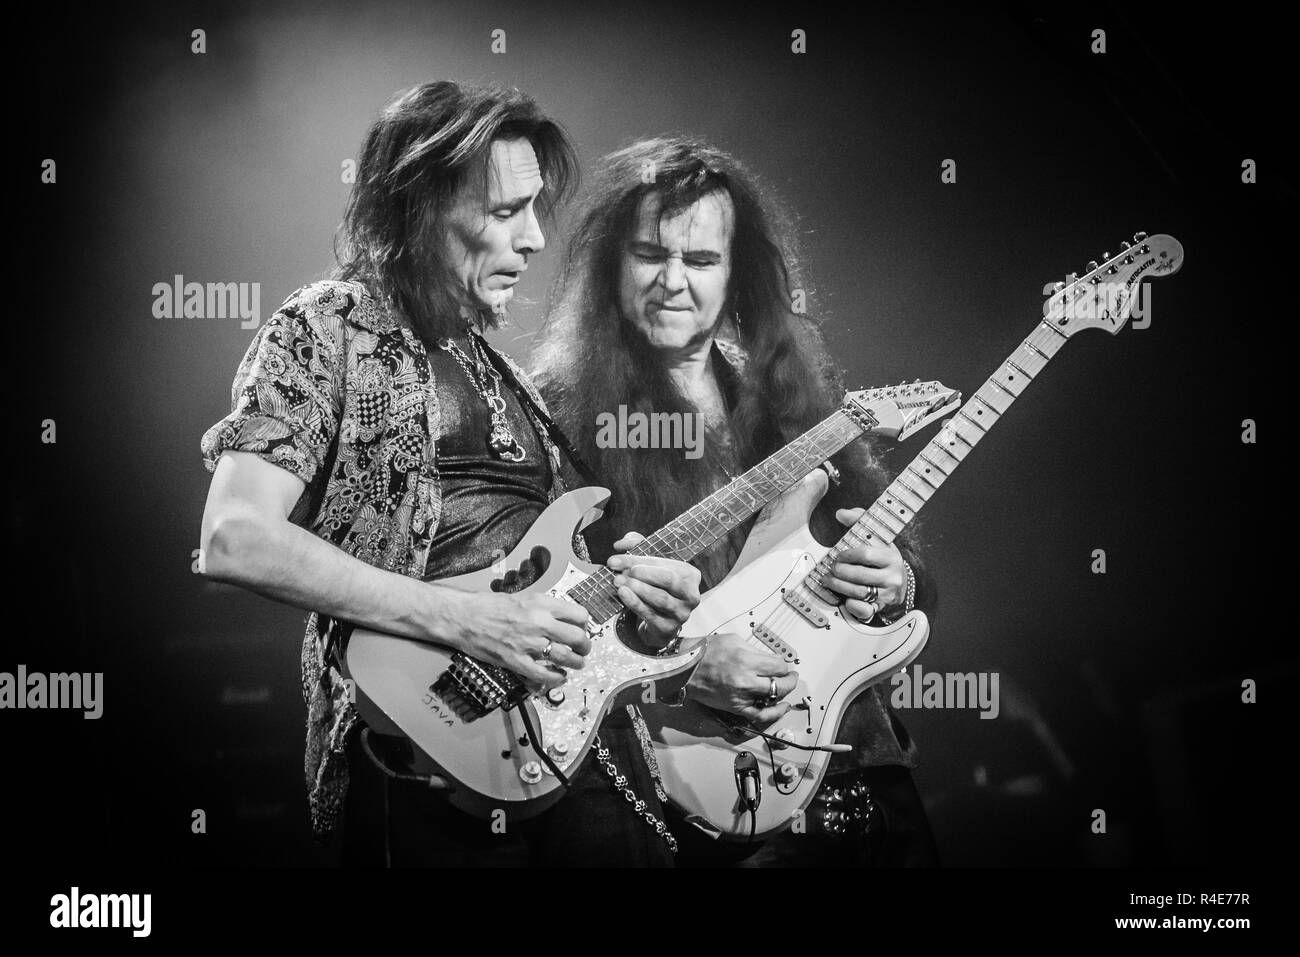 Kitchener, Ontario, Canada. 25th Nov, 2018. American rock/heavy metal supergroup 'Generation Axe' formed by Steve Vai in 2016. Supergroup performed sold out show at Centre in The Square in Kitchener, Ontario. Band members: TOSIN ABASI, STEVE VAI, ZAKK WYLDE, YNGWIE MALMSTEEN. Credit: Igor Vidyashev/ZUMA Wire/Alamy Live News Stock Photo